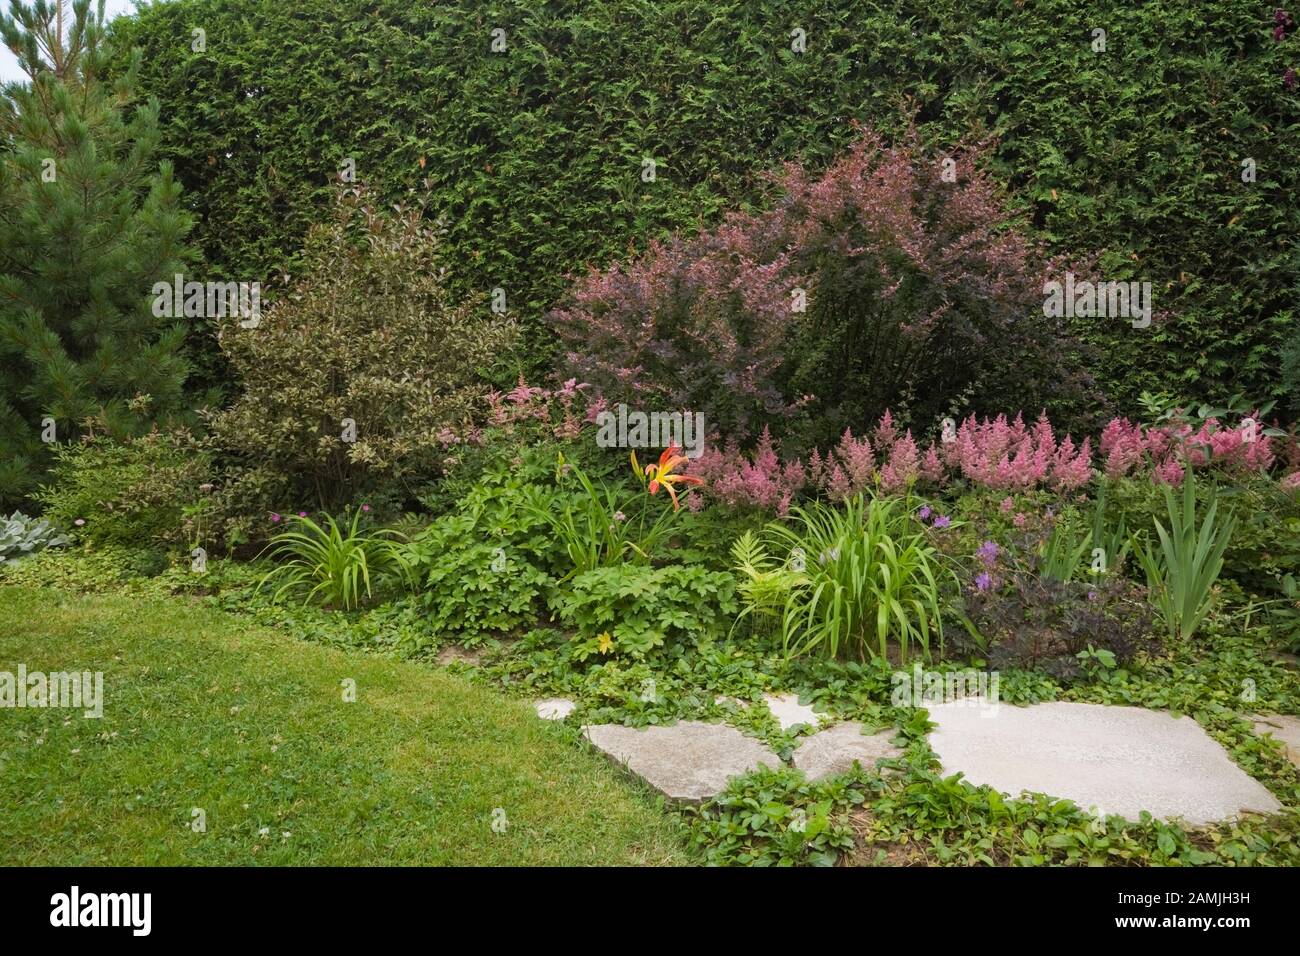 Green grass lawn and flagstone path next to border with pink Astilbe flowers and Berberis - Barberry shrub, Pinus - Pine tree, Thuja occidentalis. Stock Photo